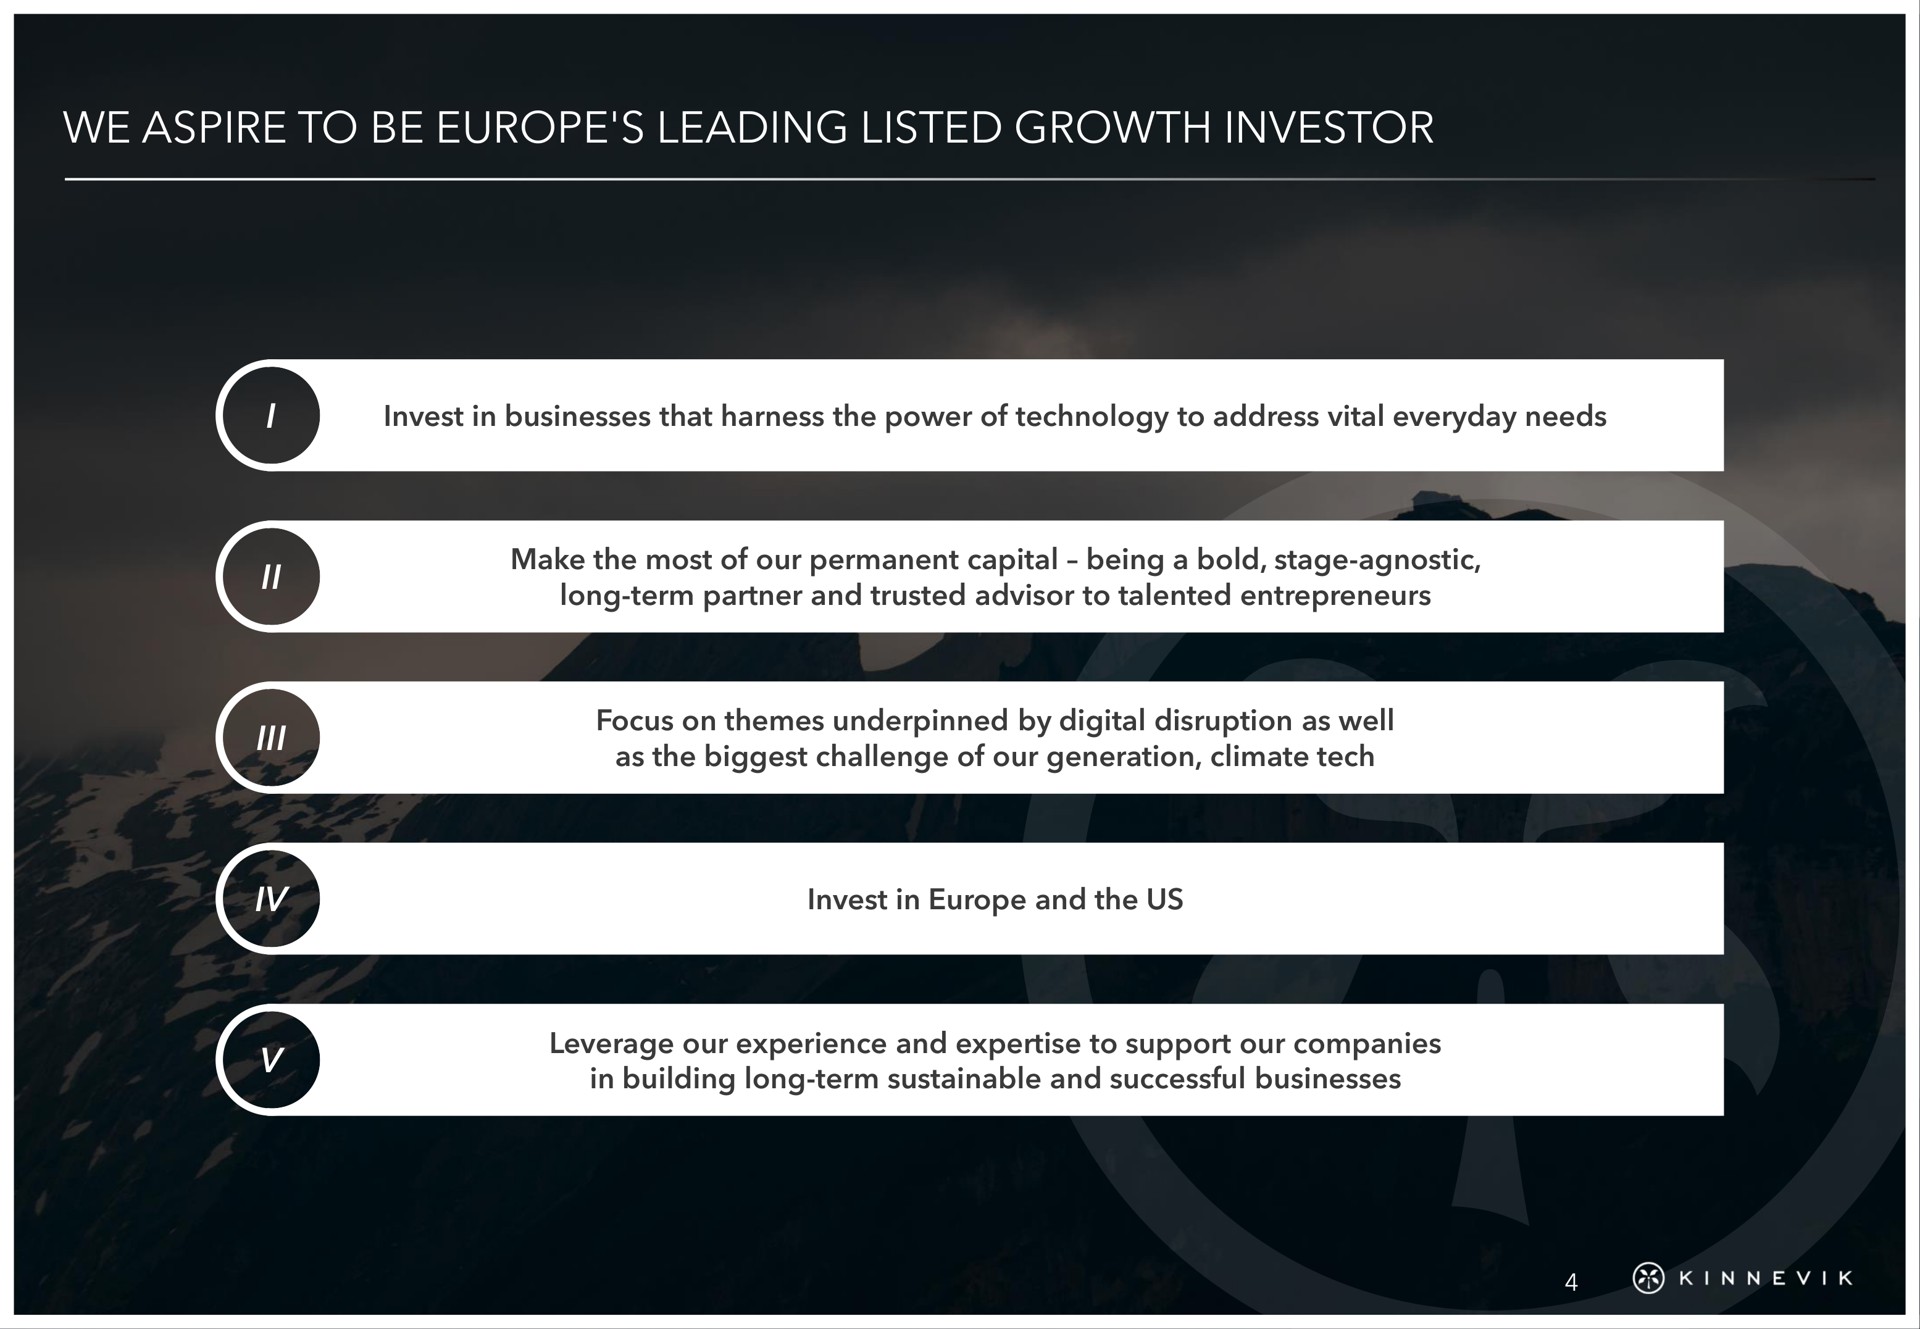 we aspire to be leading listed growth investor | Kinnevik